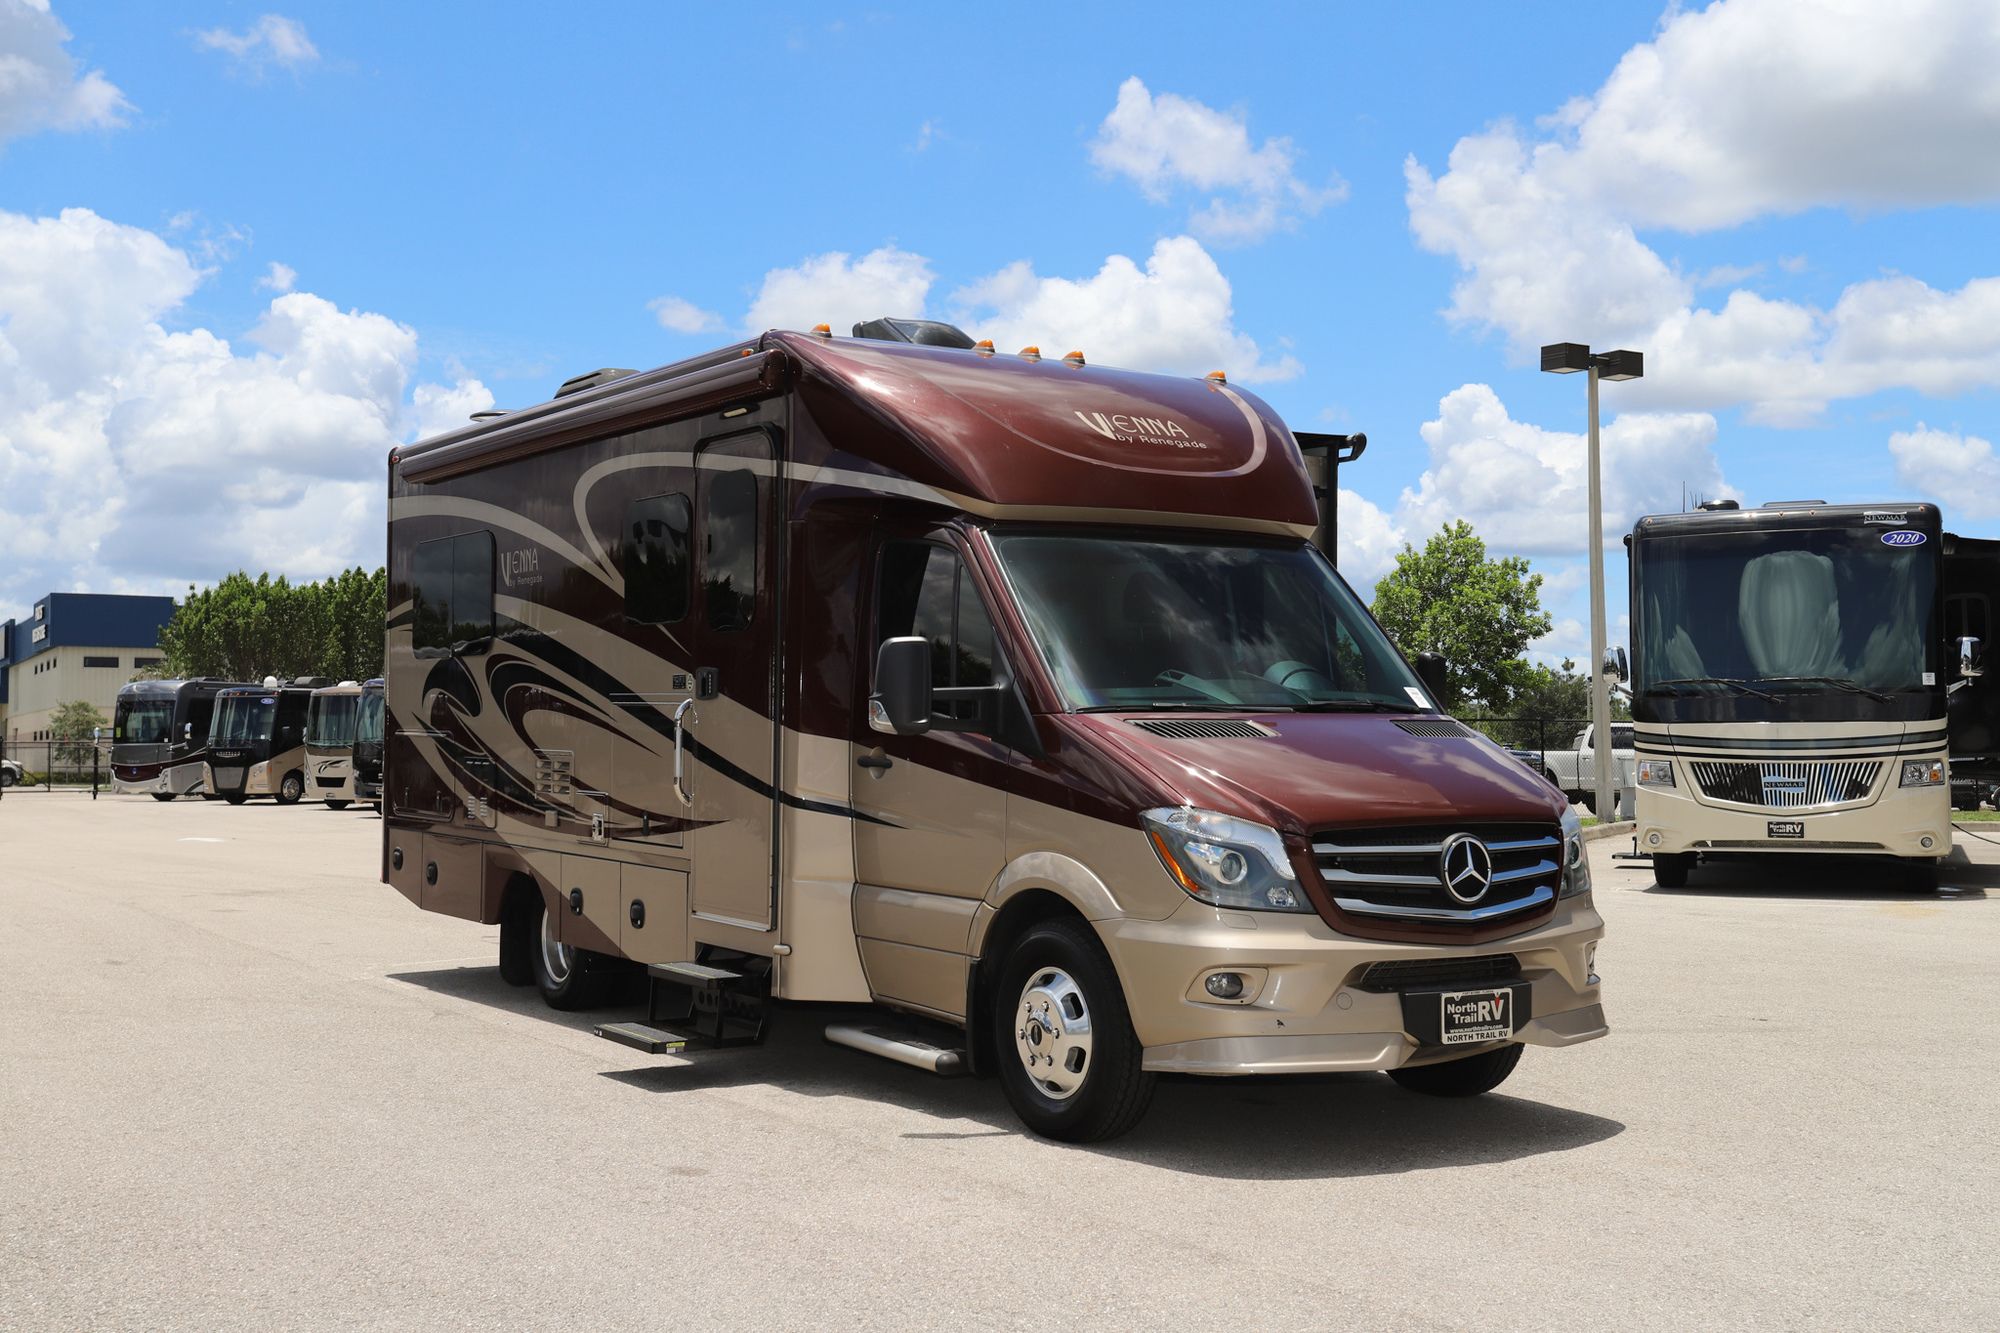 Used 2017 Renegade Rv Vienna 25VUBC Class C  For Sale